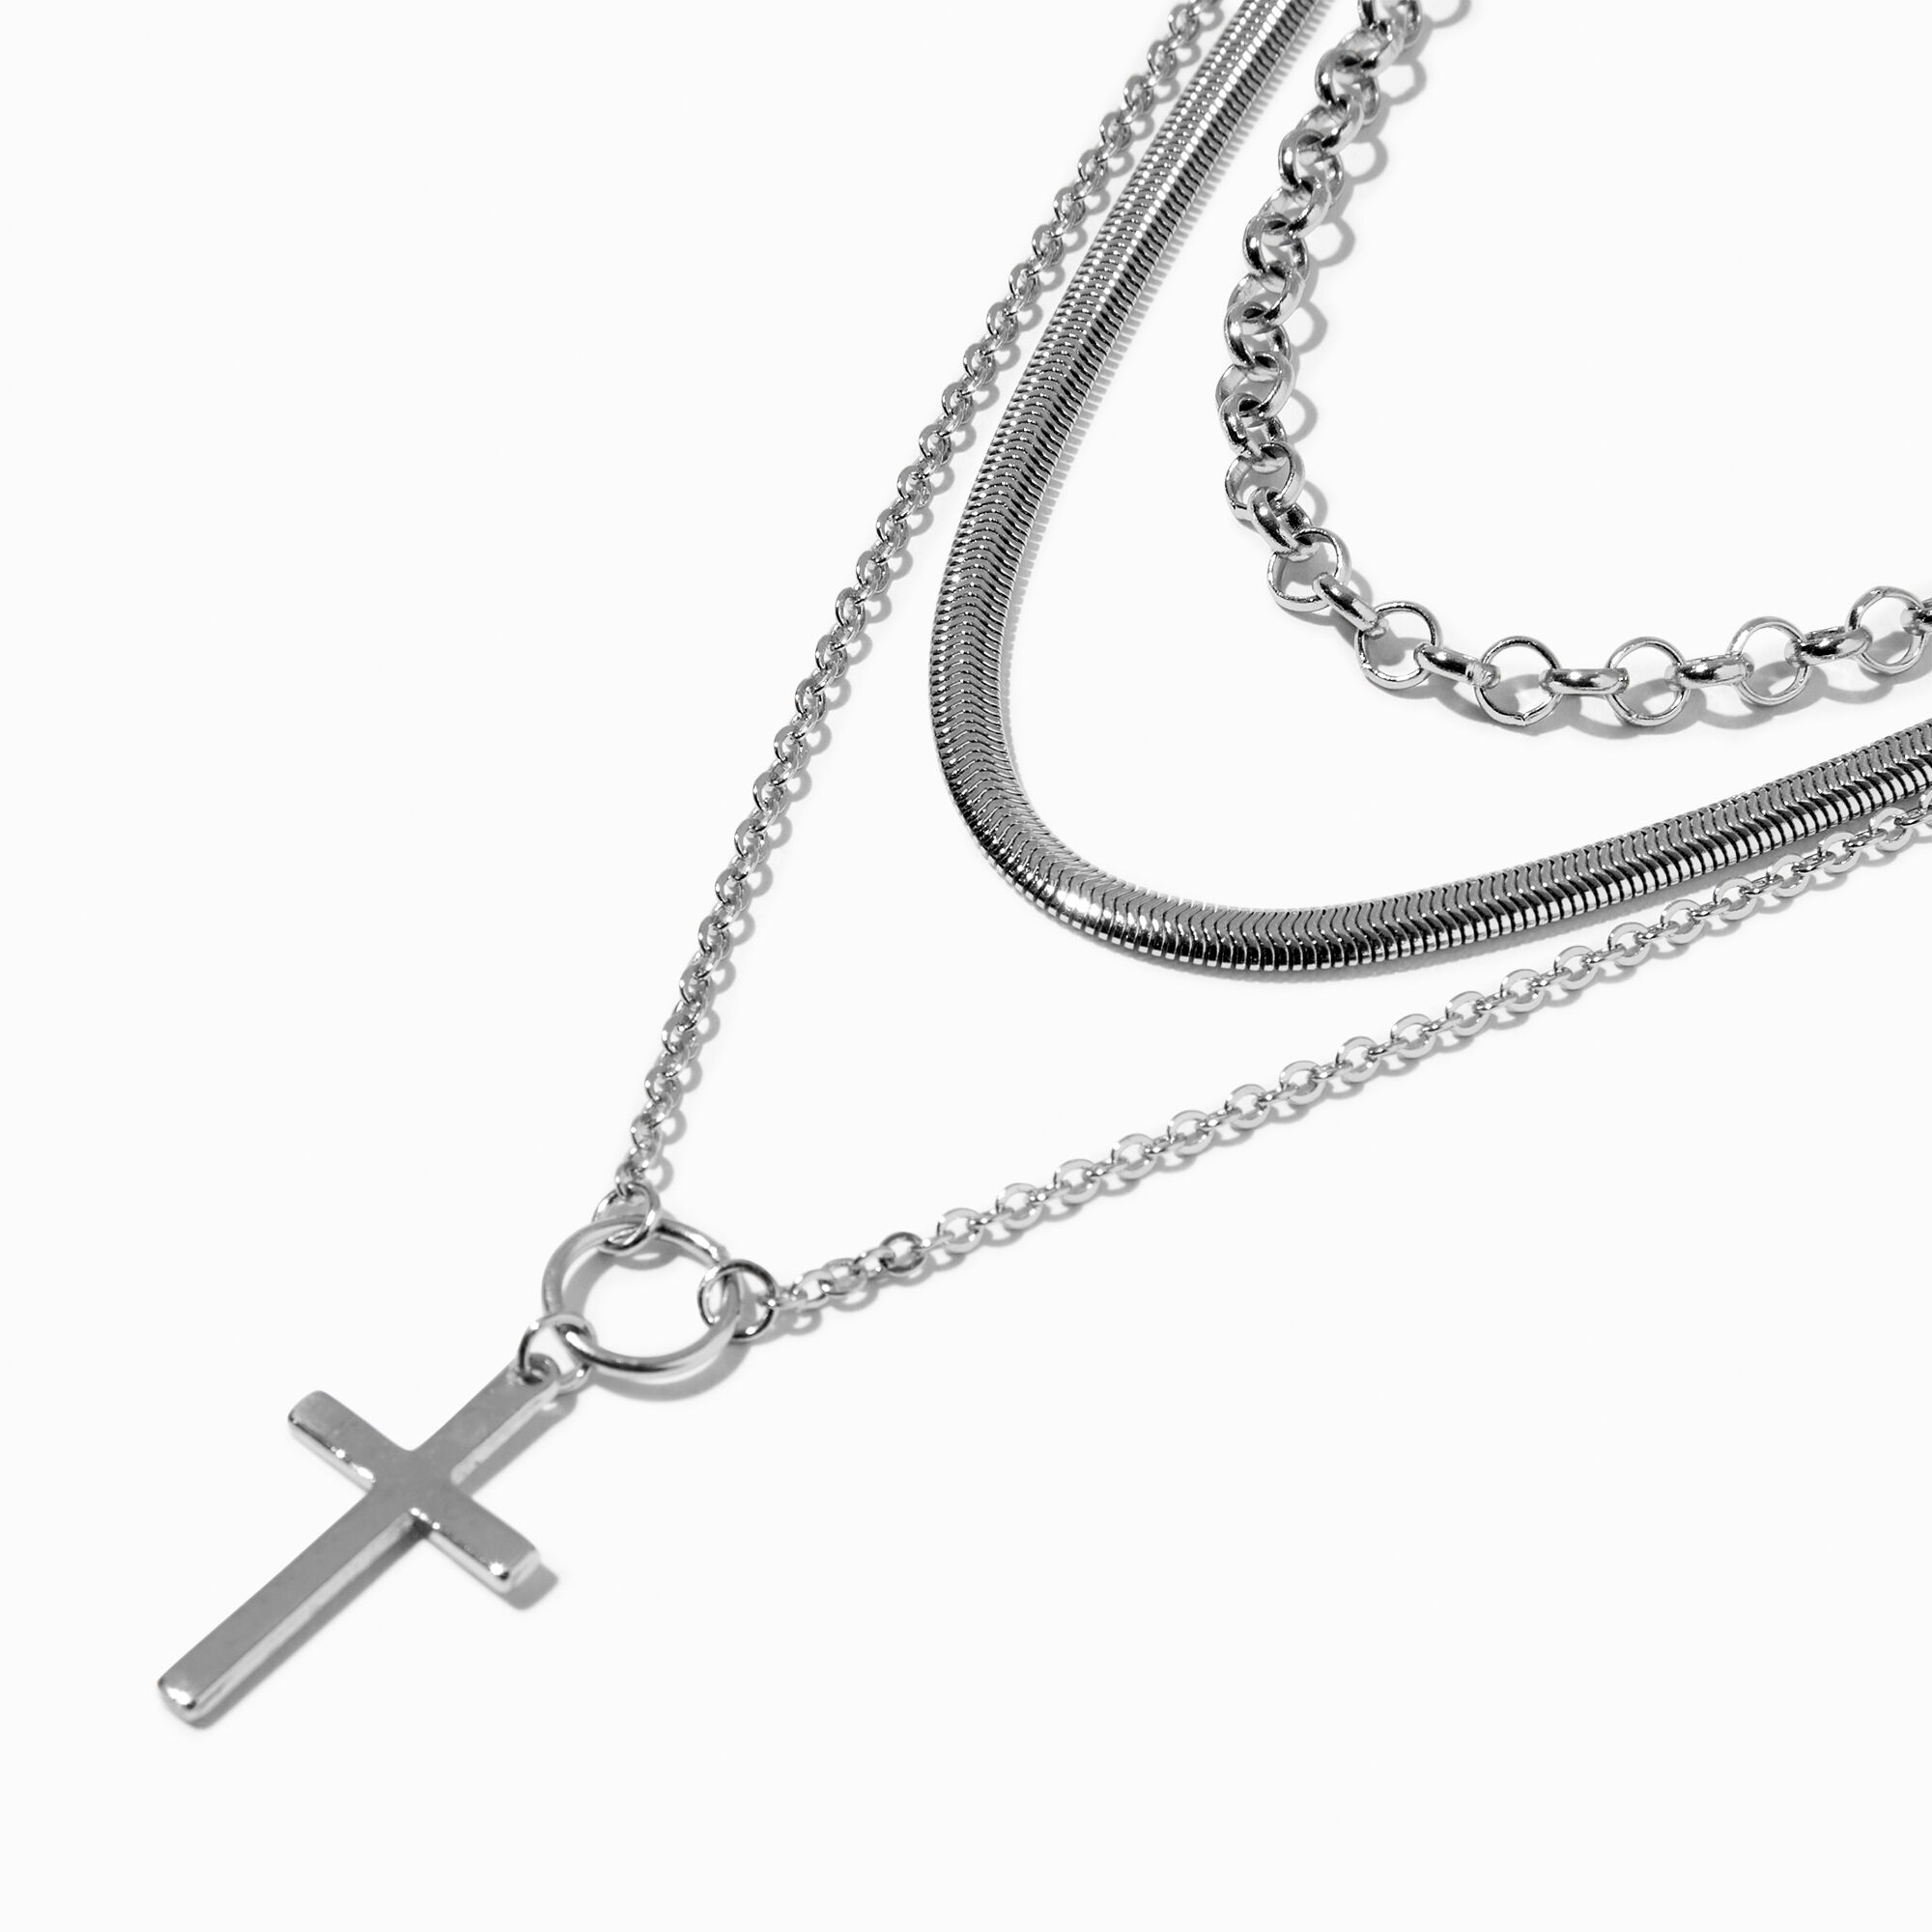 View Claires Tone Cross Chain MultiStrand Necklace Silver information